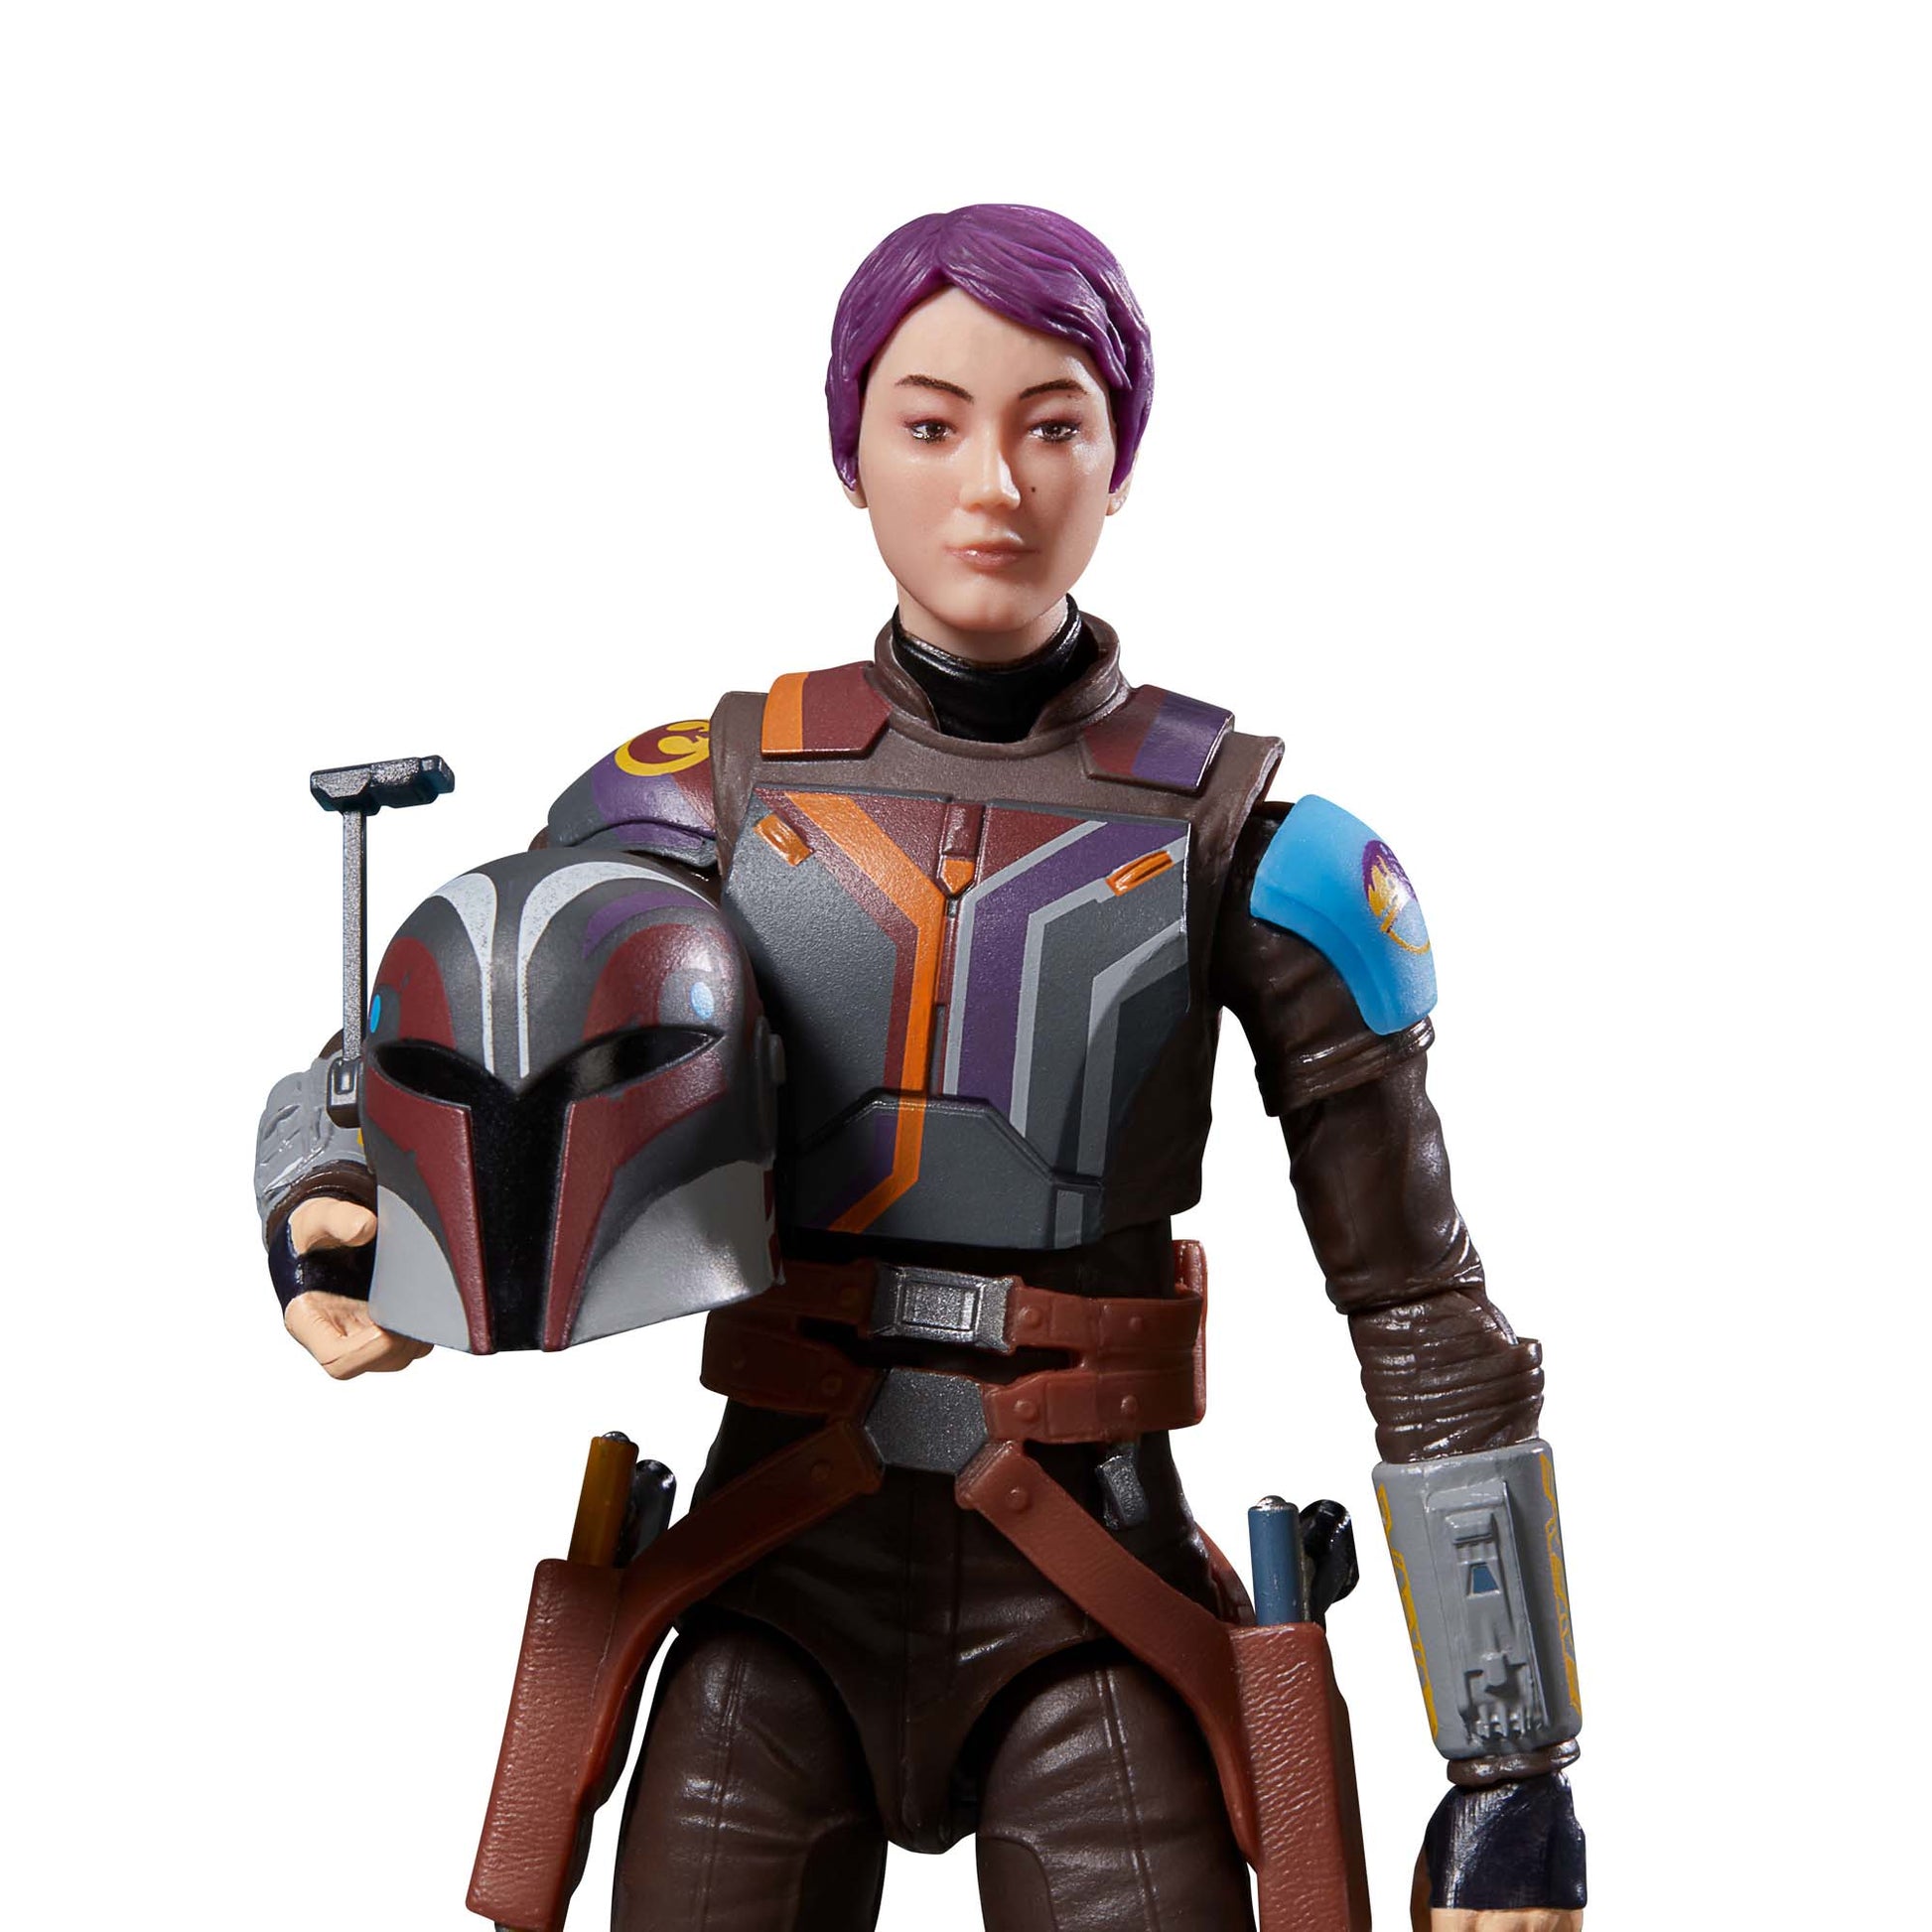 Star Wars The Black Series Sabine Wren 6-Inch Action Figure Toy with accessories - Heretoserveyou